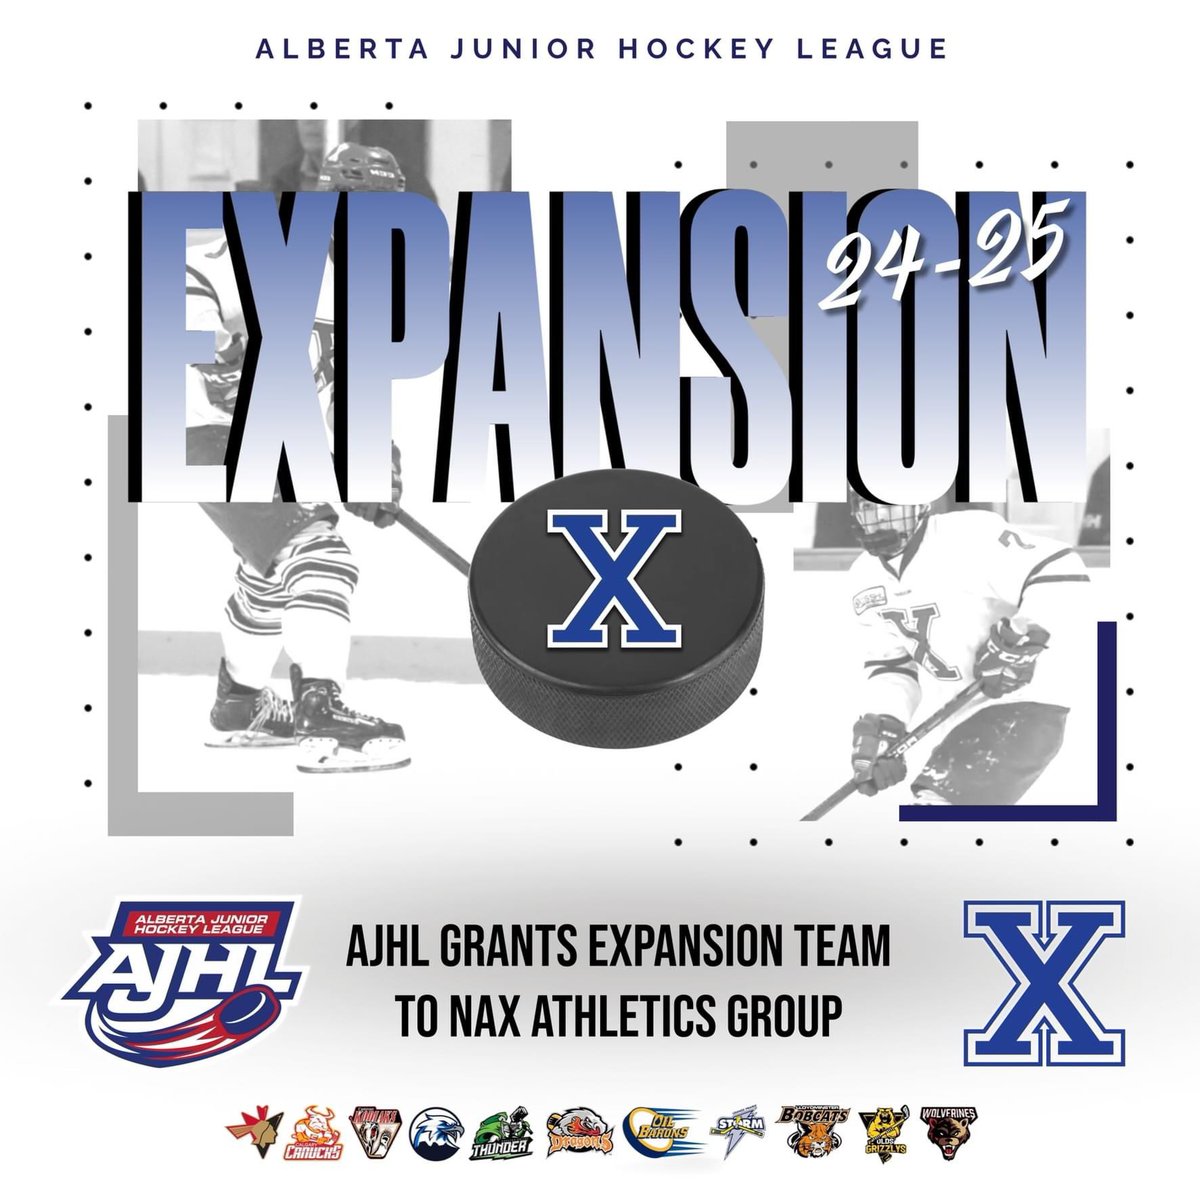 AJHL ANNOUNCES EXPANSION FRANCHISE April 26th, 2024 – The Alberta Junior Hockey League (AJHL) has awarded an expansion franchise to the Northern Alberta Xtreme (NAX) Athletics Group and community of Devon, AB for the 2024-25 season. Read More: facebook.com/share/p/spT2je…